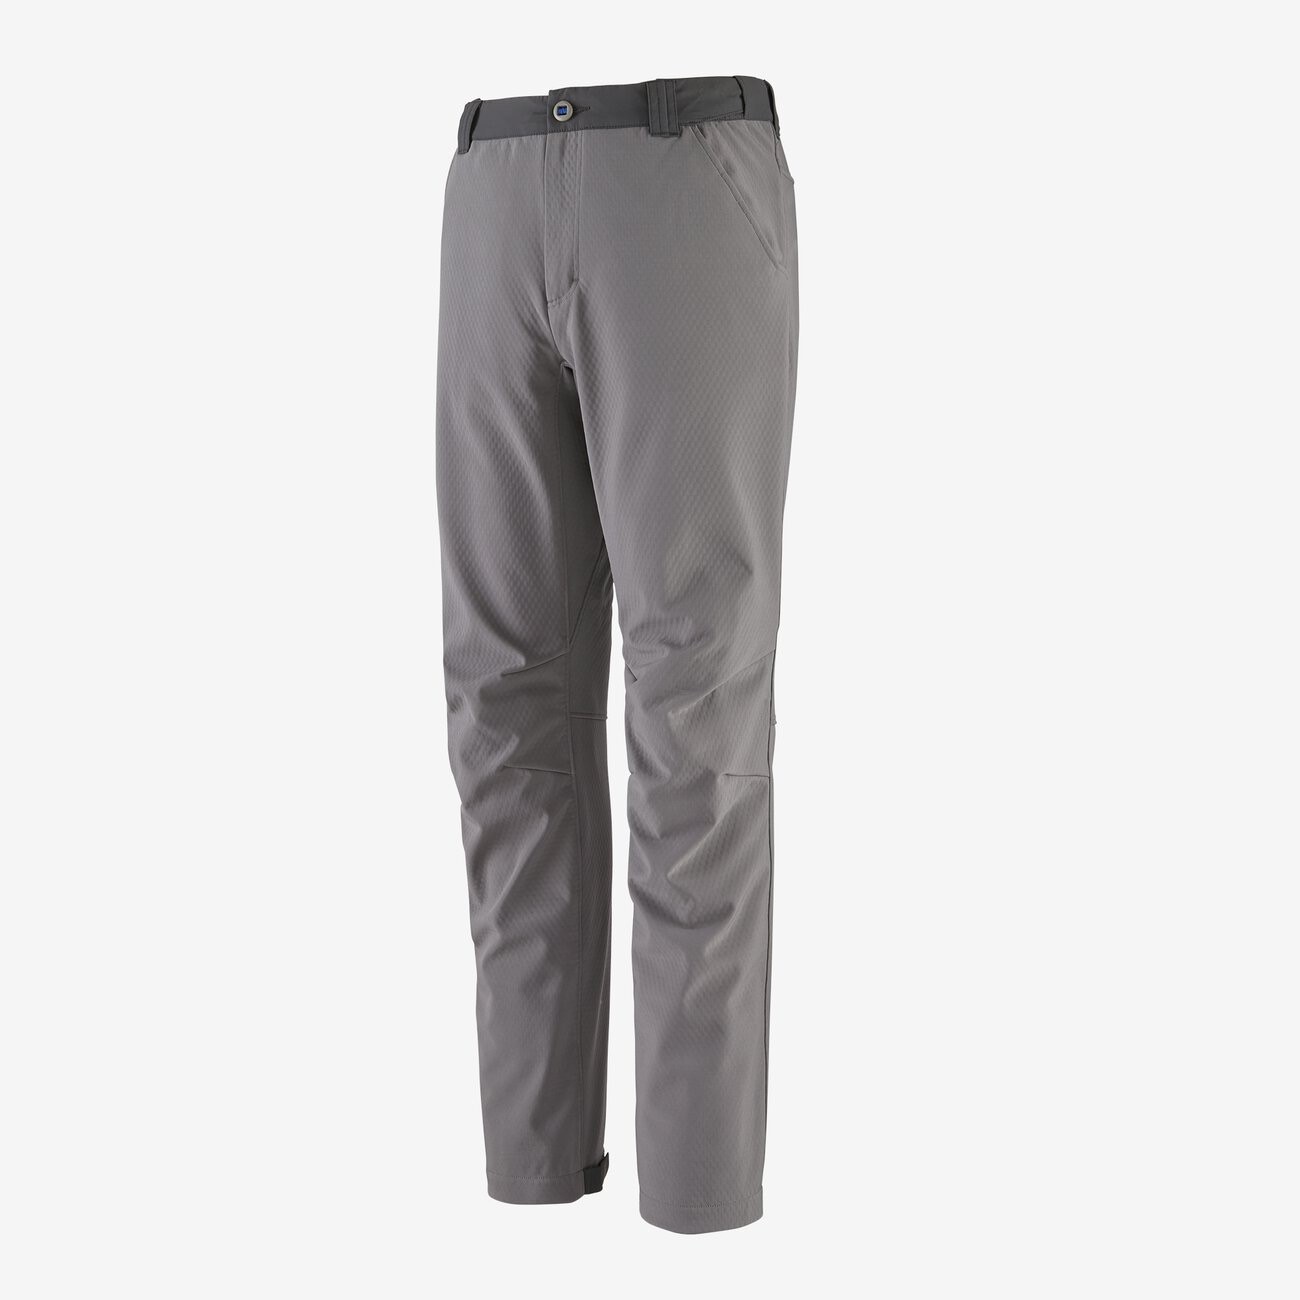 Patagonia M's Shelled Insulator Pants - Noble Grey - XL